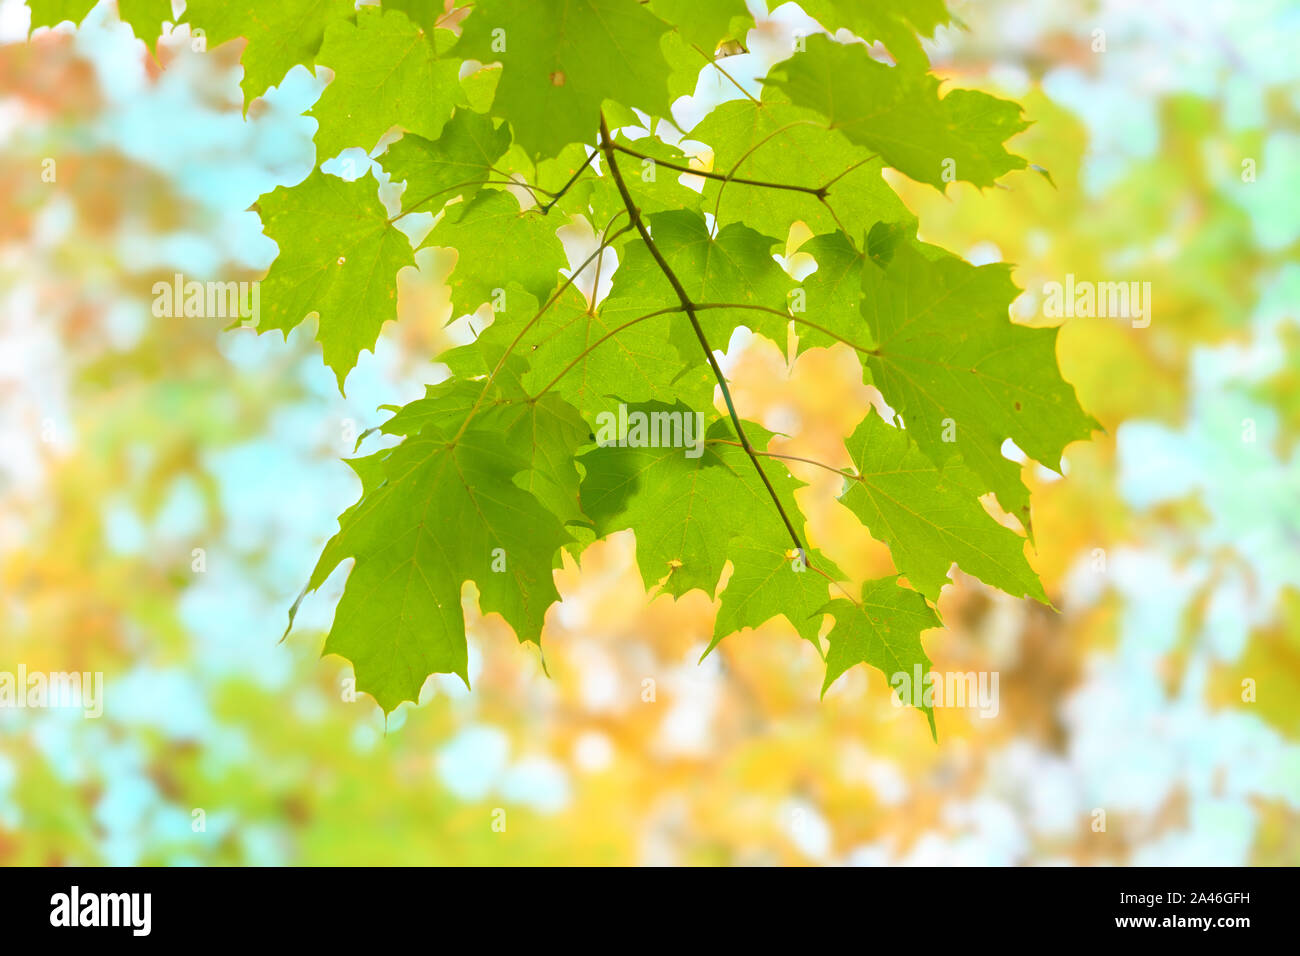 Looking up at green maple leaves against a canopy of fall foliage. Stock Photo